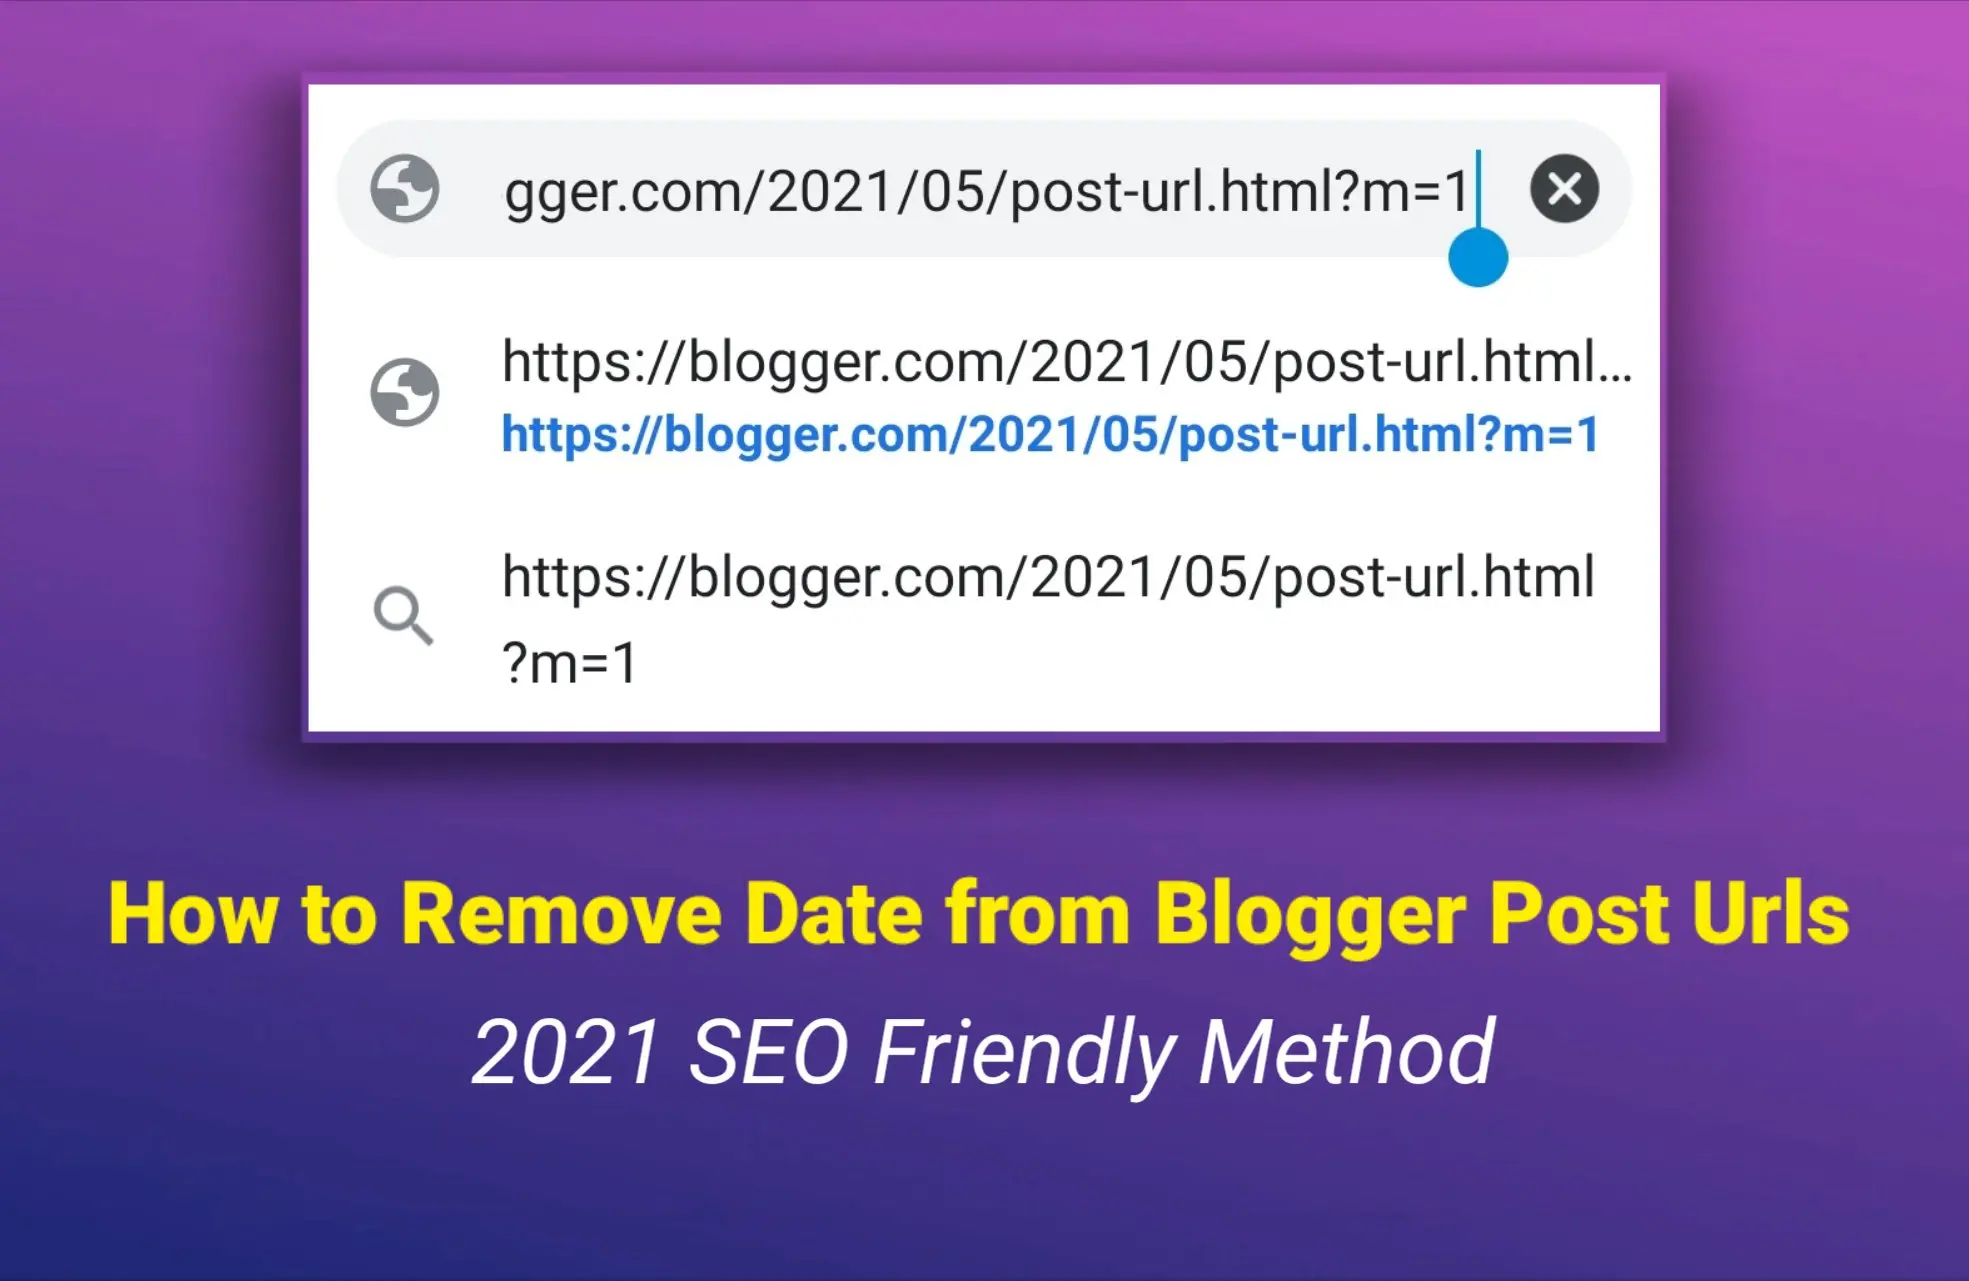 How to Remove Date from Blogger/Blogspot Site URL